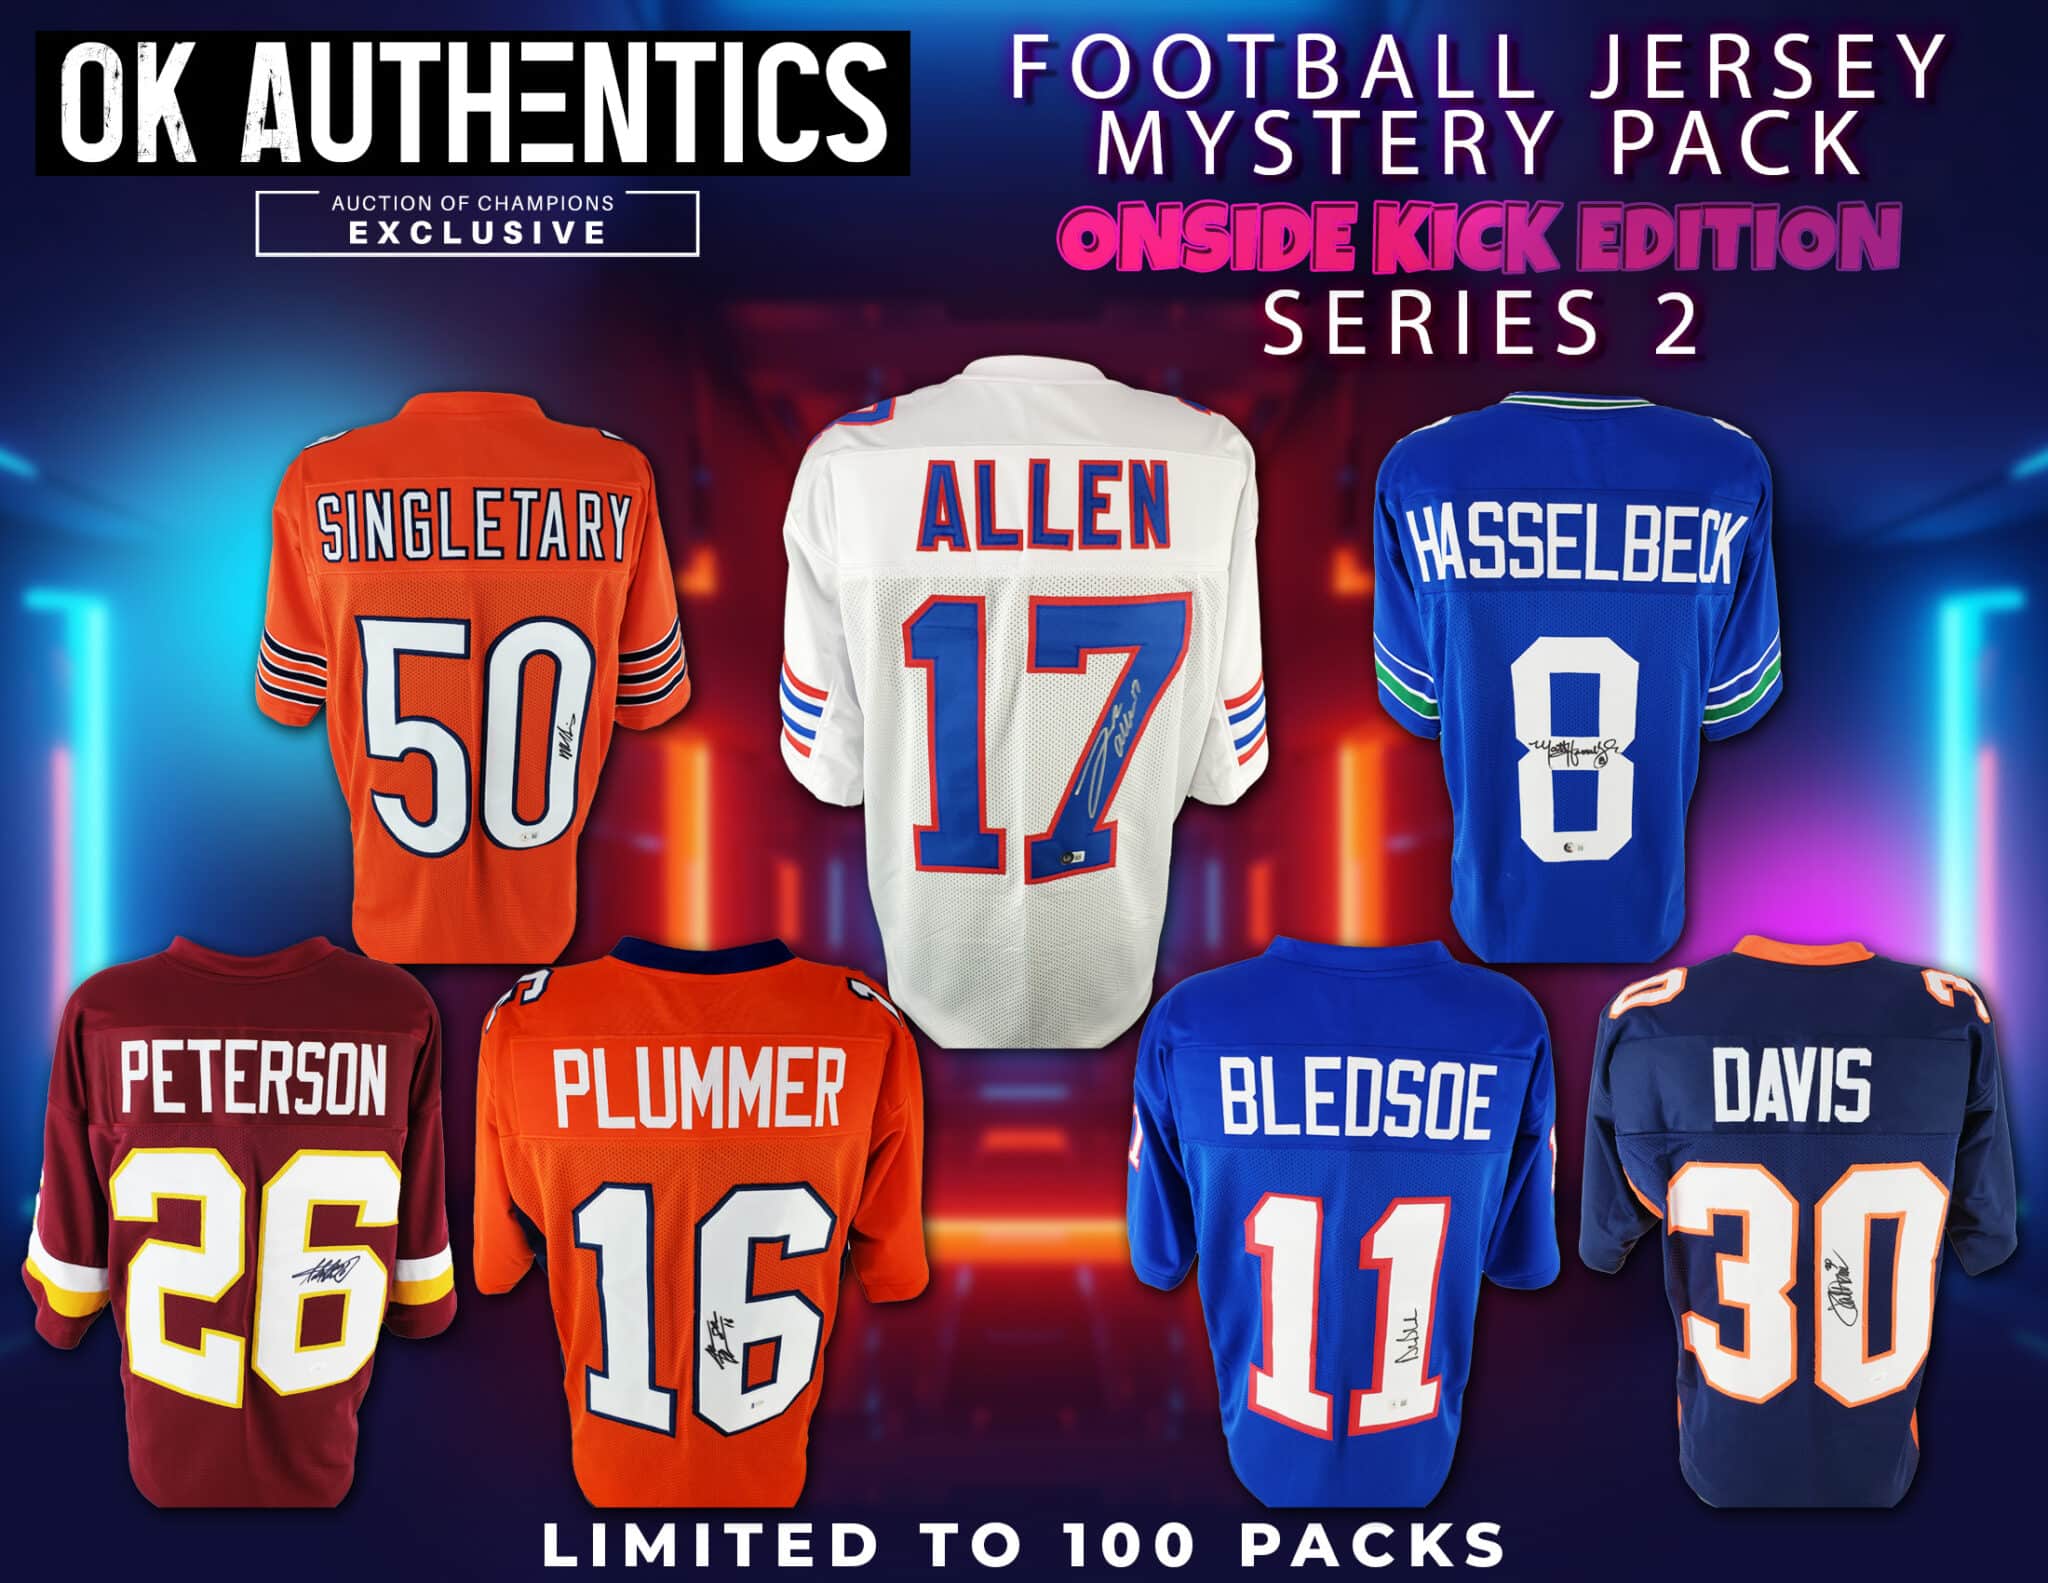 OK Authentics Onside Kick Edition Football Jersey Mystery Pack Series 2 -  Limited to 100! Josh Allen, Adrian Peterson & More!